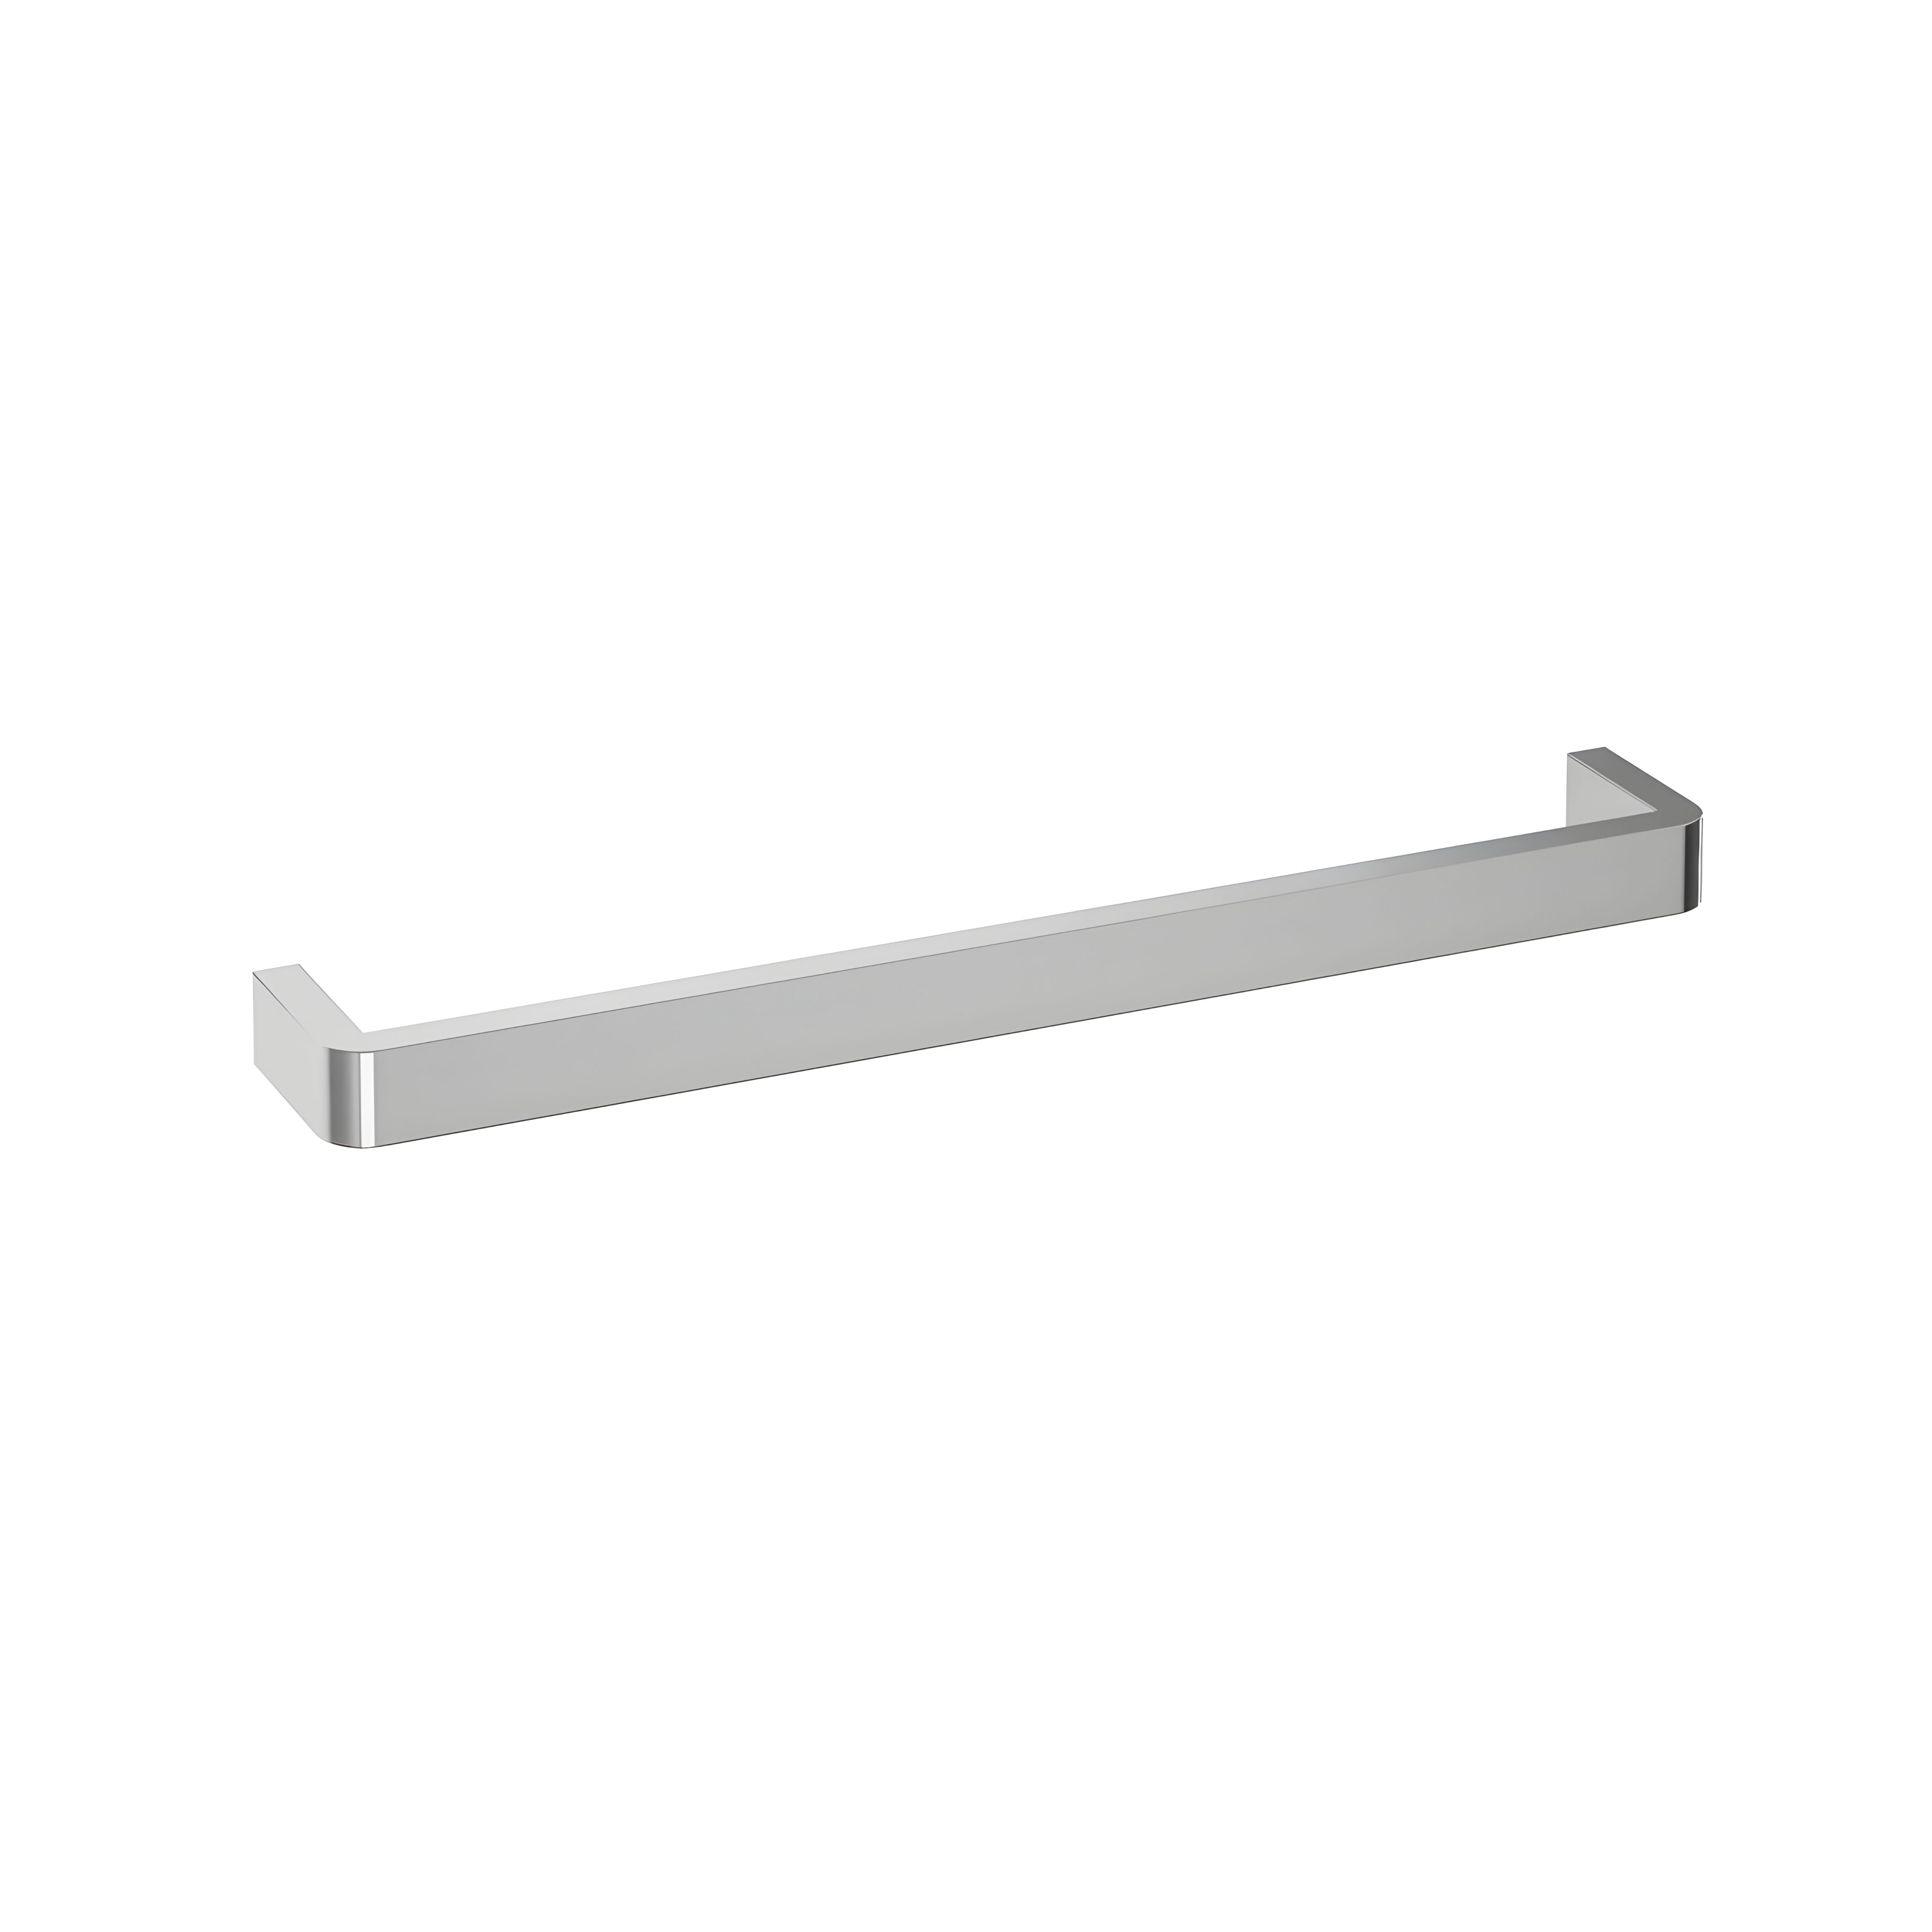 THERMOGROUP SQUARE SINGLE BAR HEATED RAIL WITH CURVED CORNERS STAINLESS STEEL 640MM